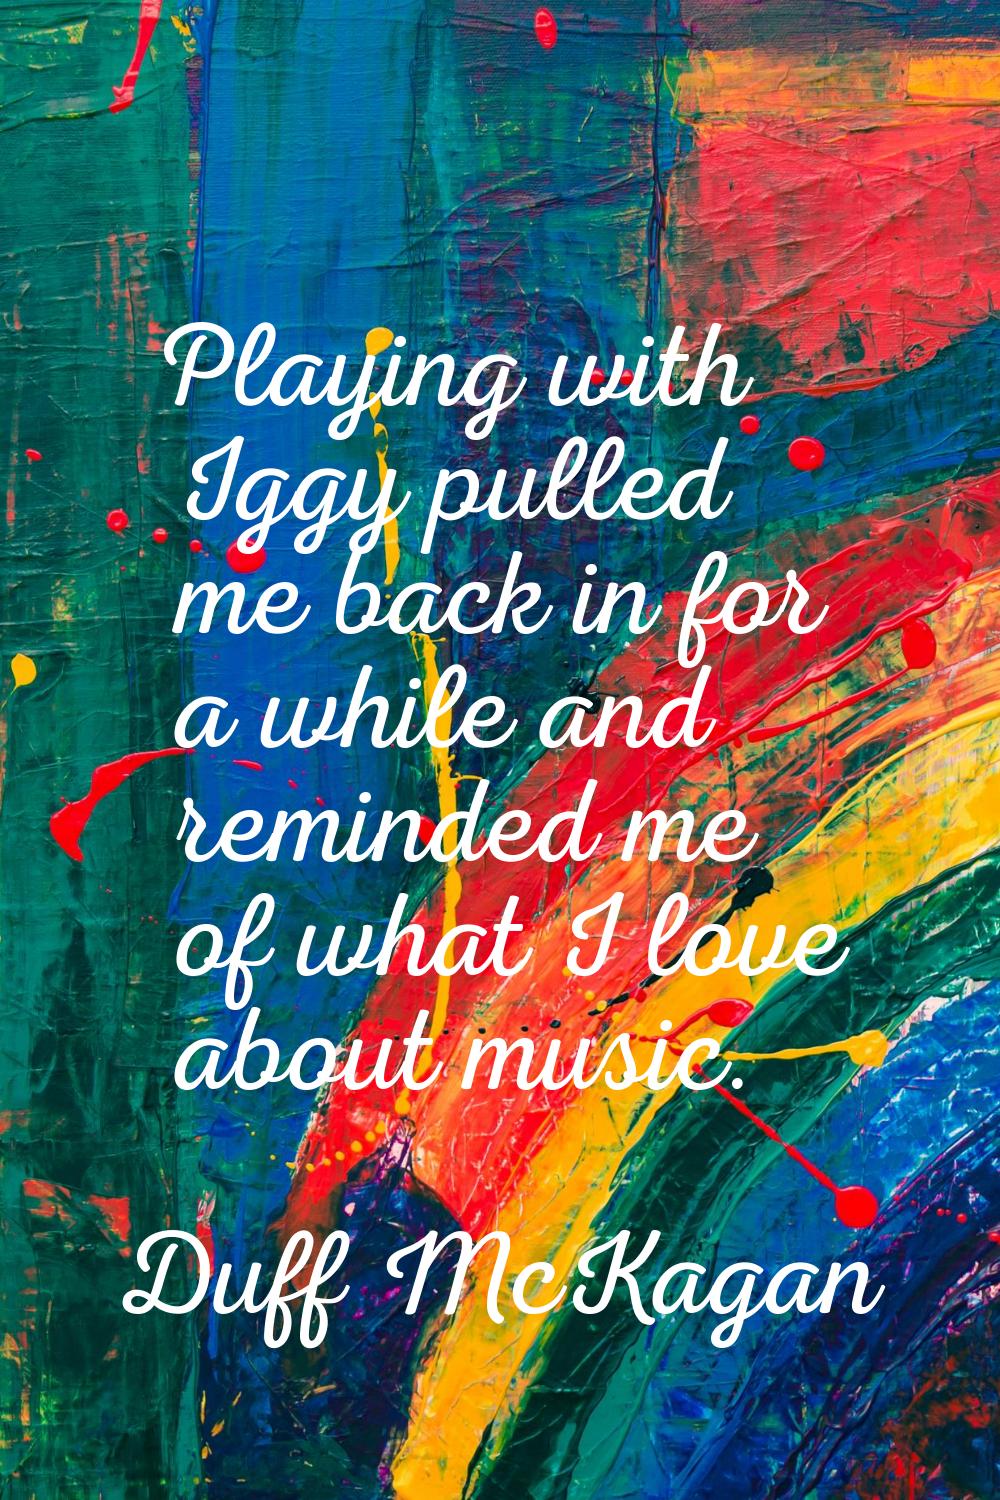 Playing with Iggy pulled me back in for a while and reminded me of what I love about music.